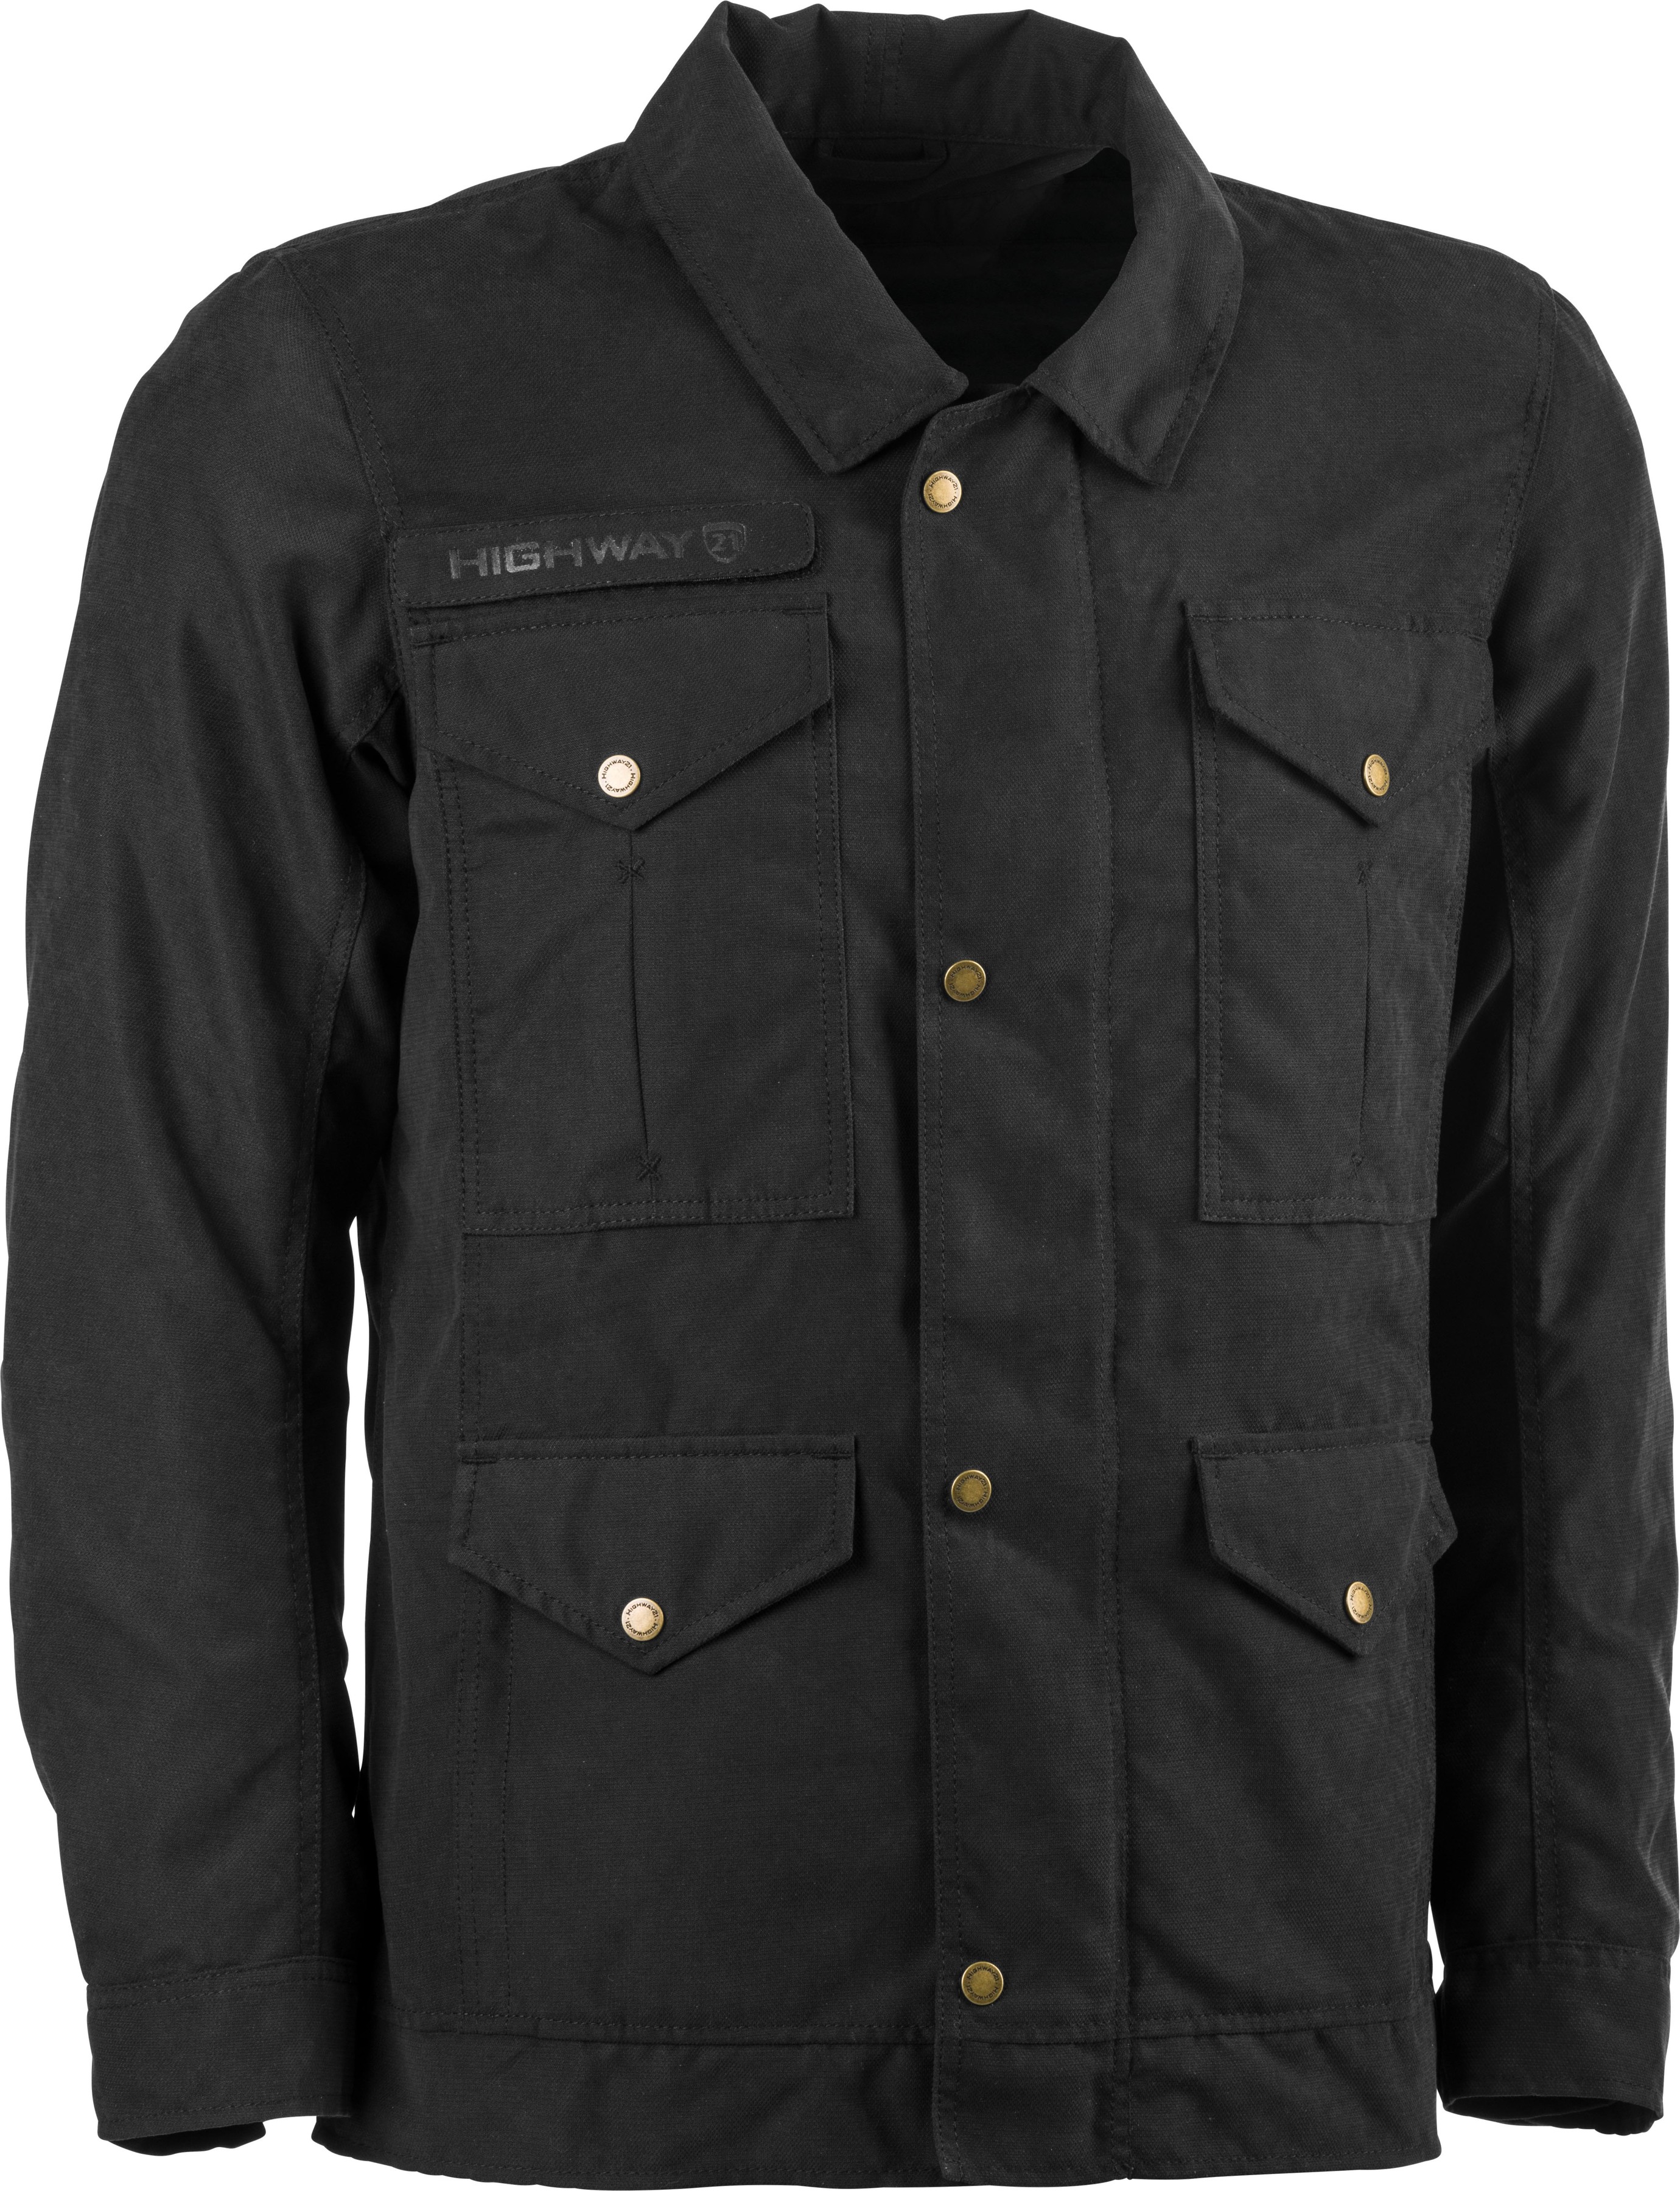 Winchester Riding Jacket Black Large - Click Image to Close